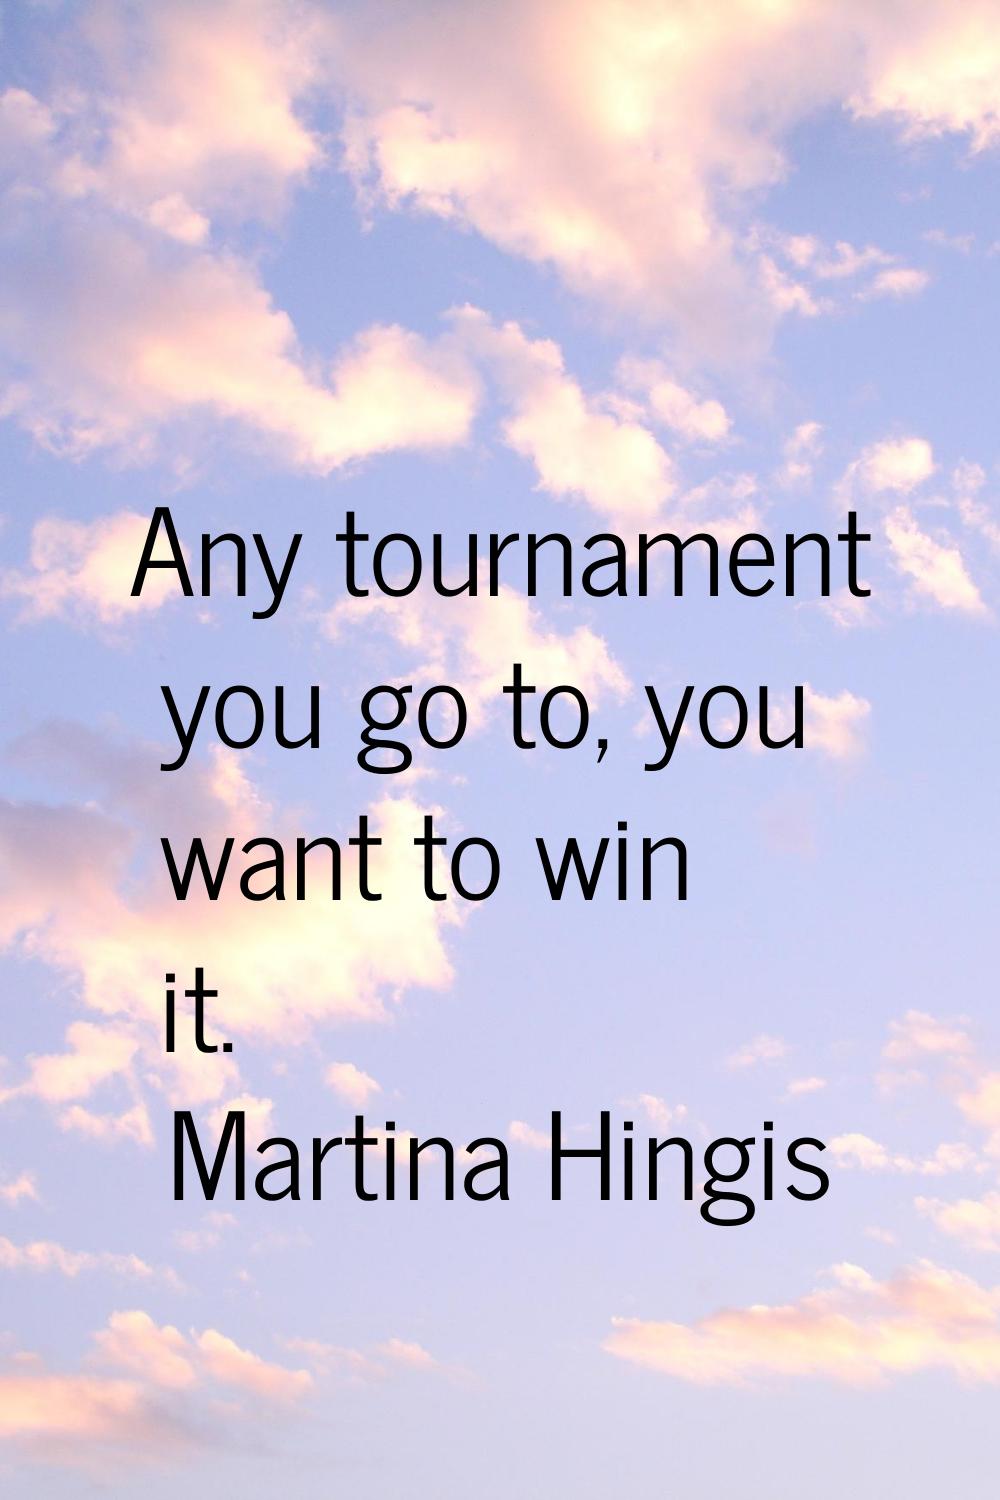 Any tournament you go to, you want to win it.